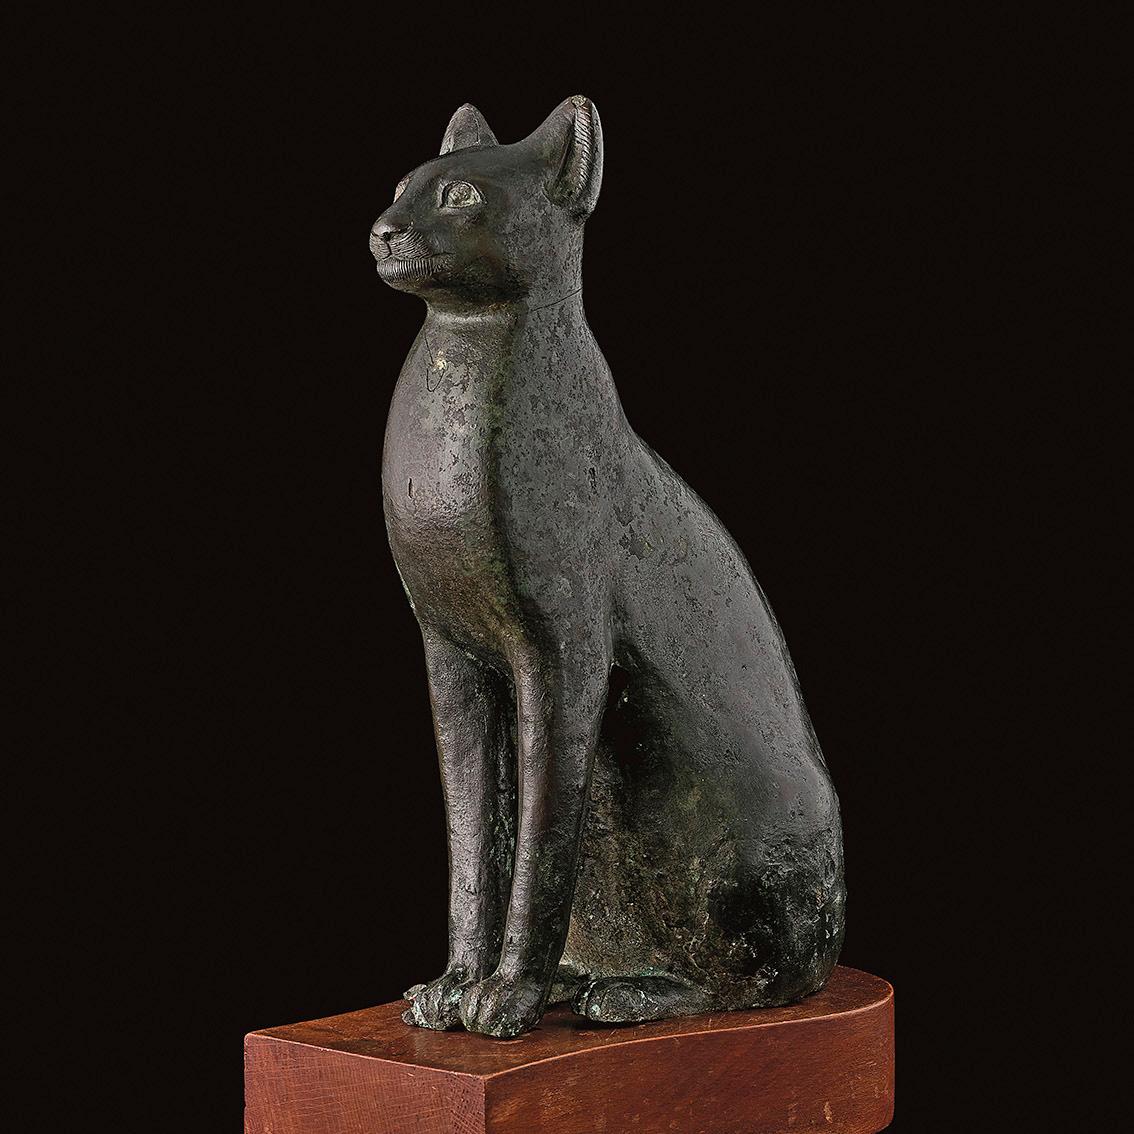 White Glove Treatment for Egyptian Feline in Bronze - Lots sold